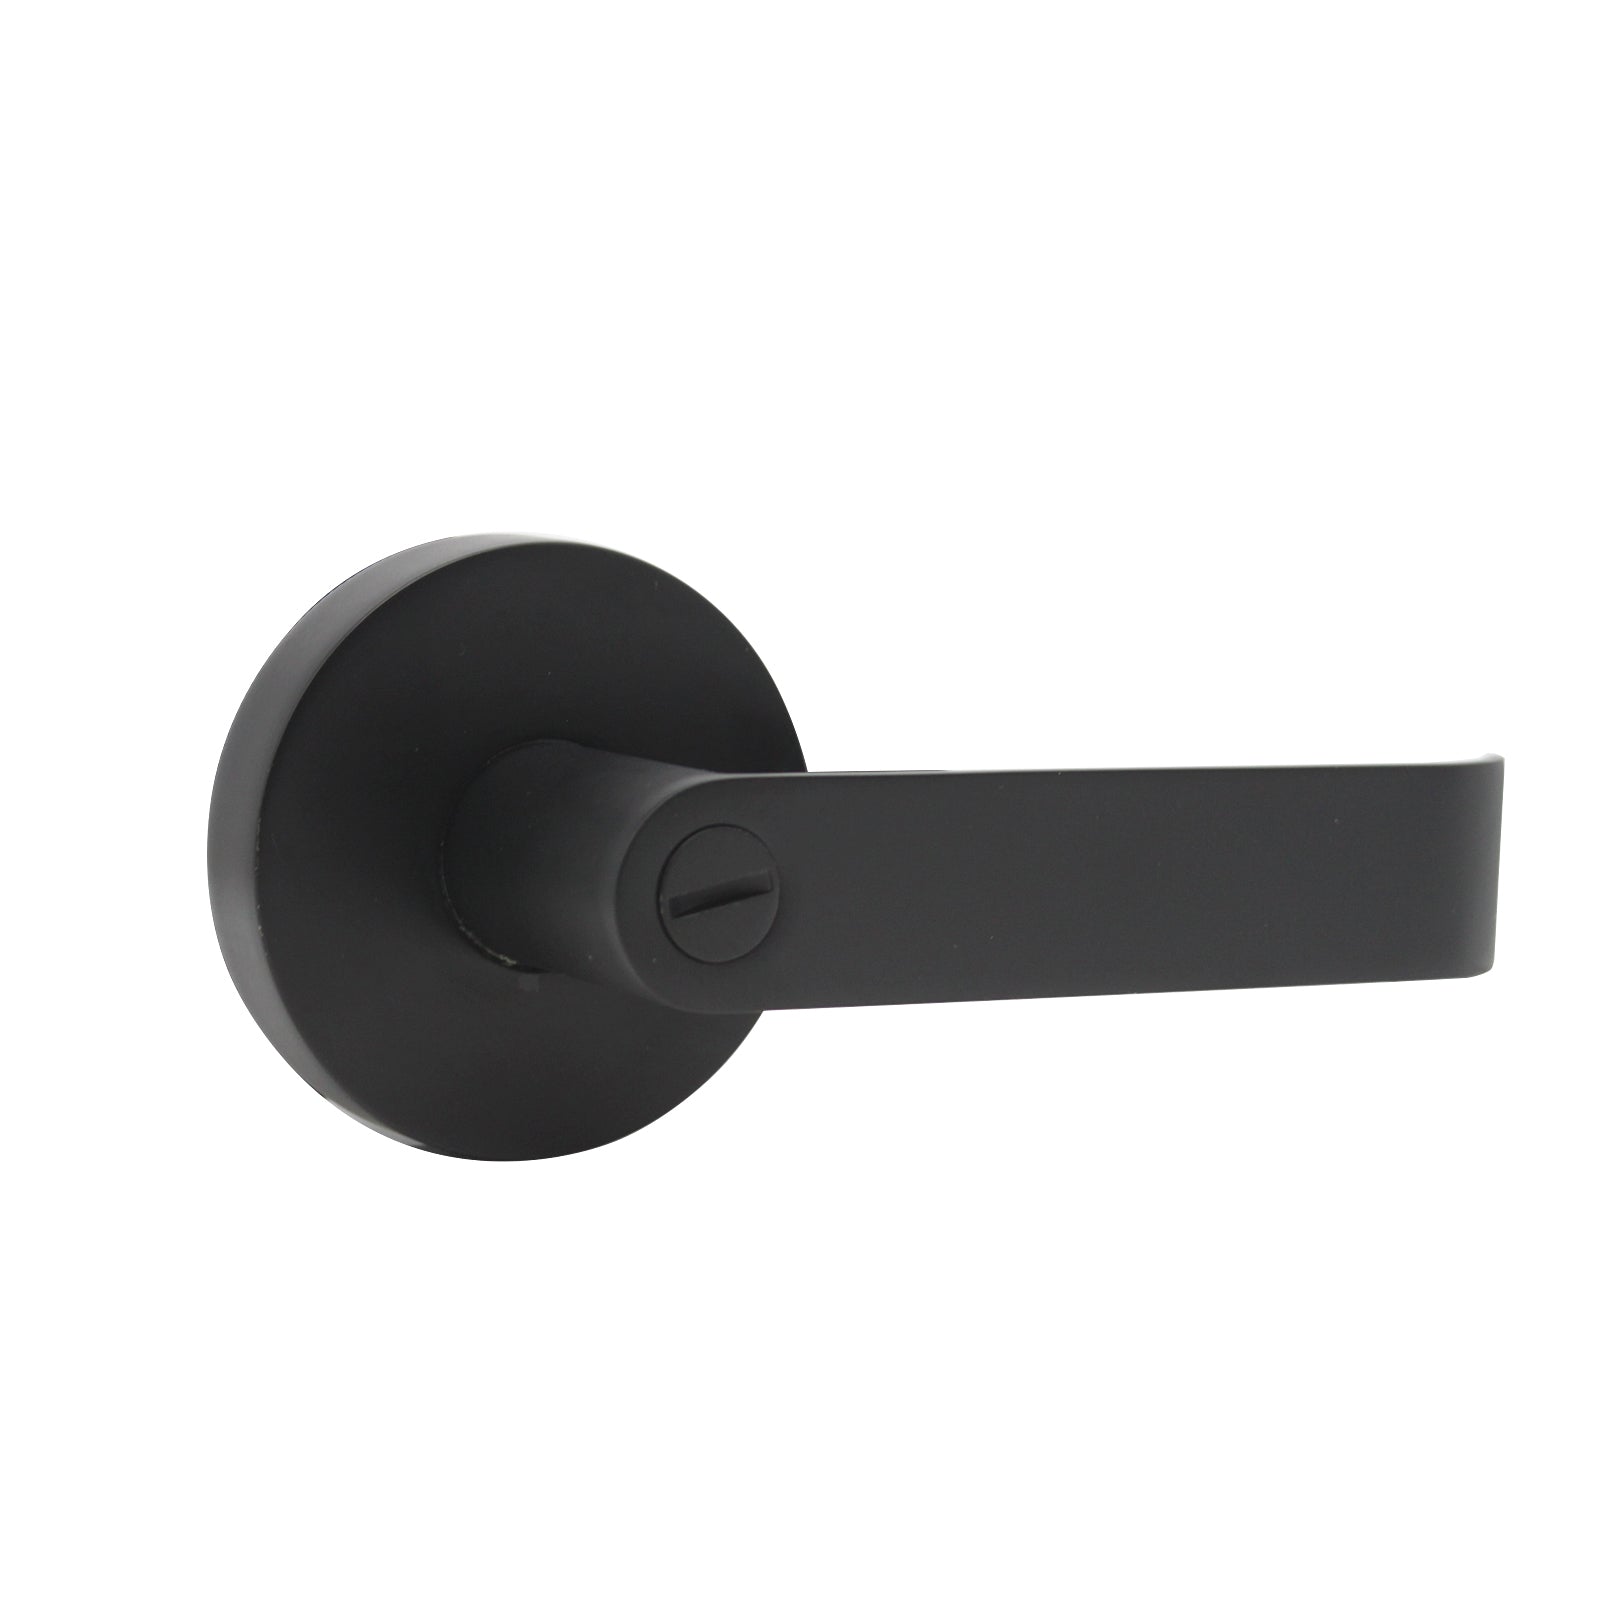 Black Finish Privacy Door Lever Lock with Round Rosette